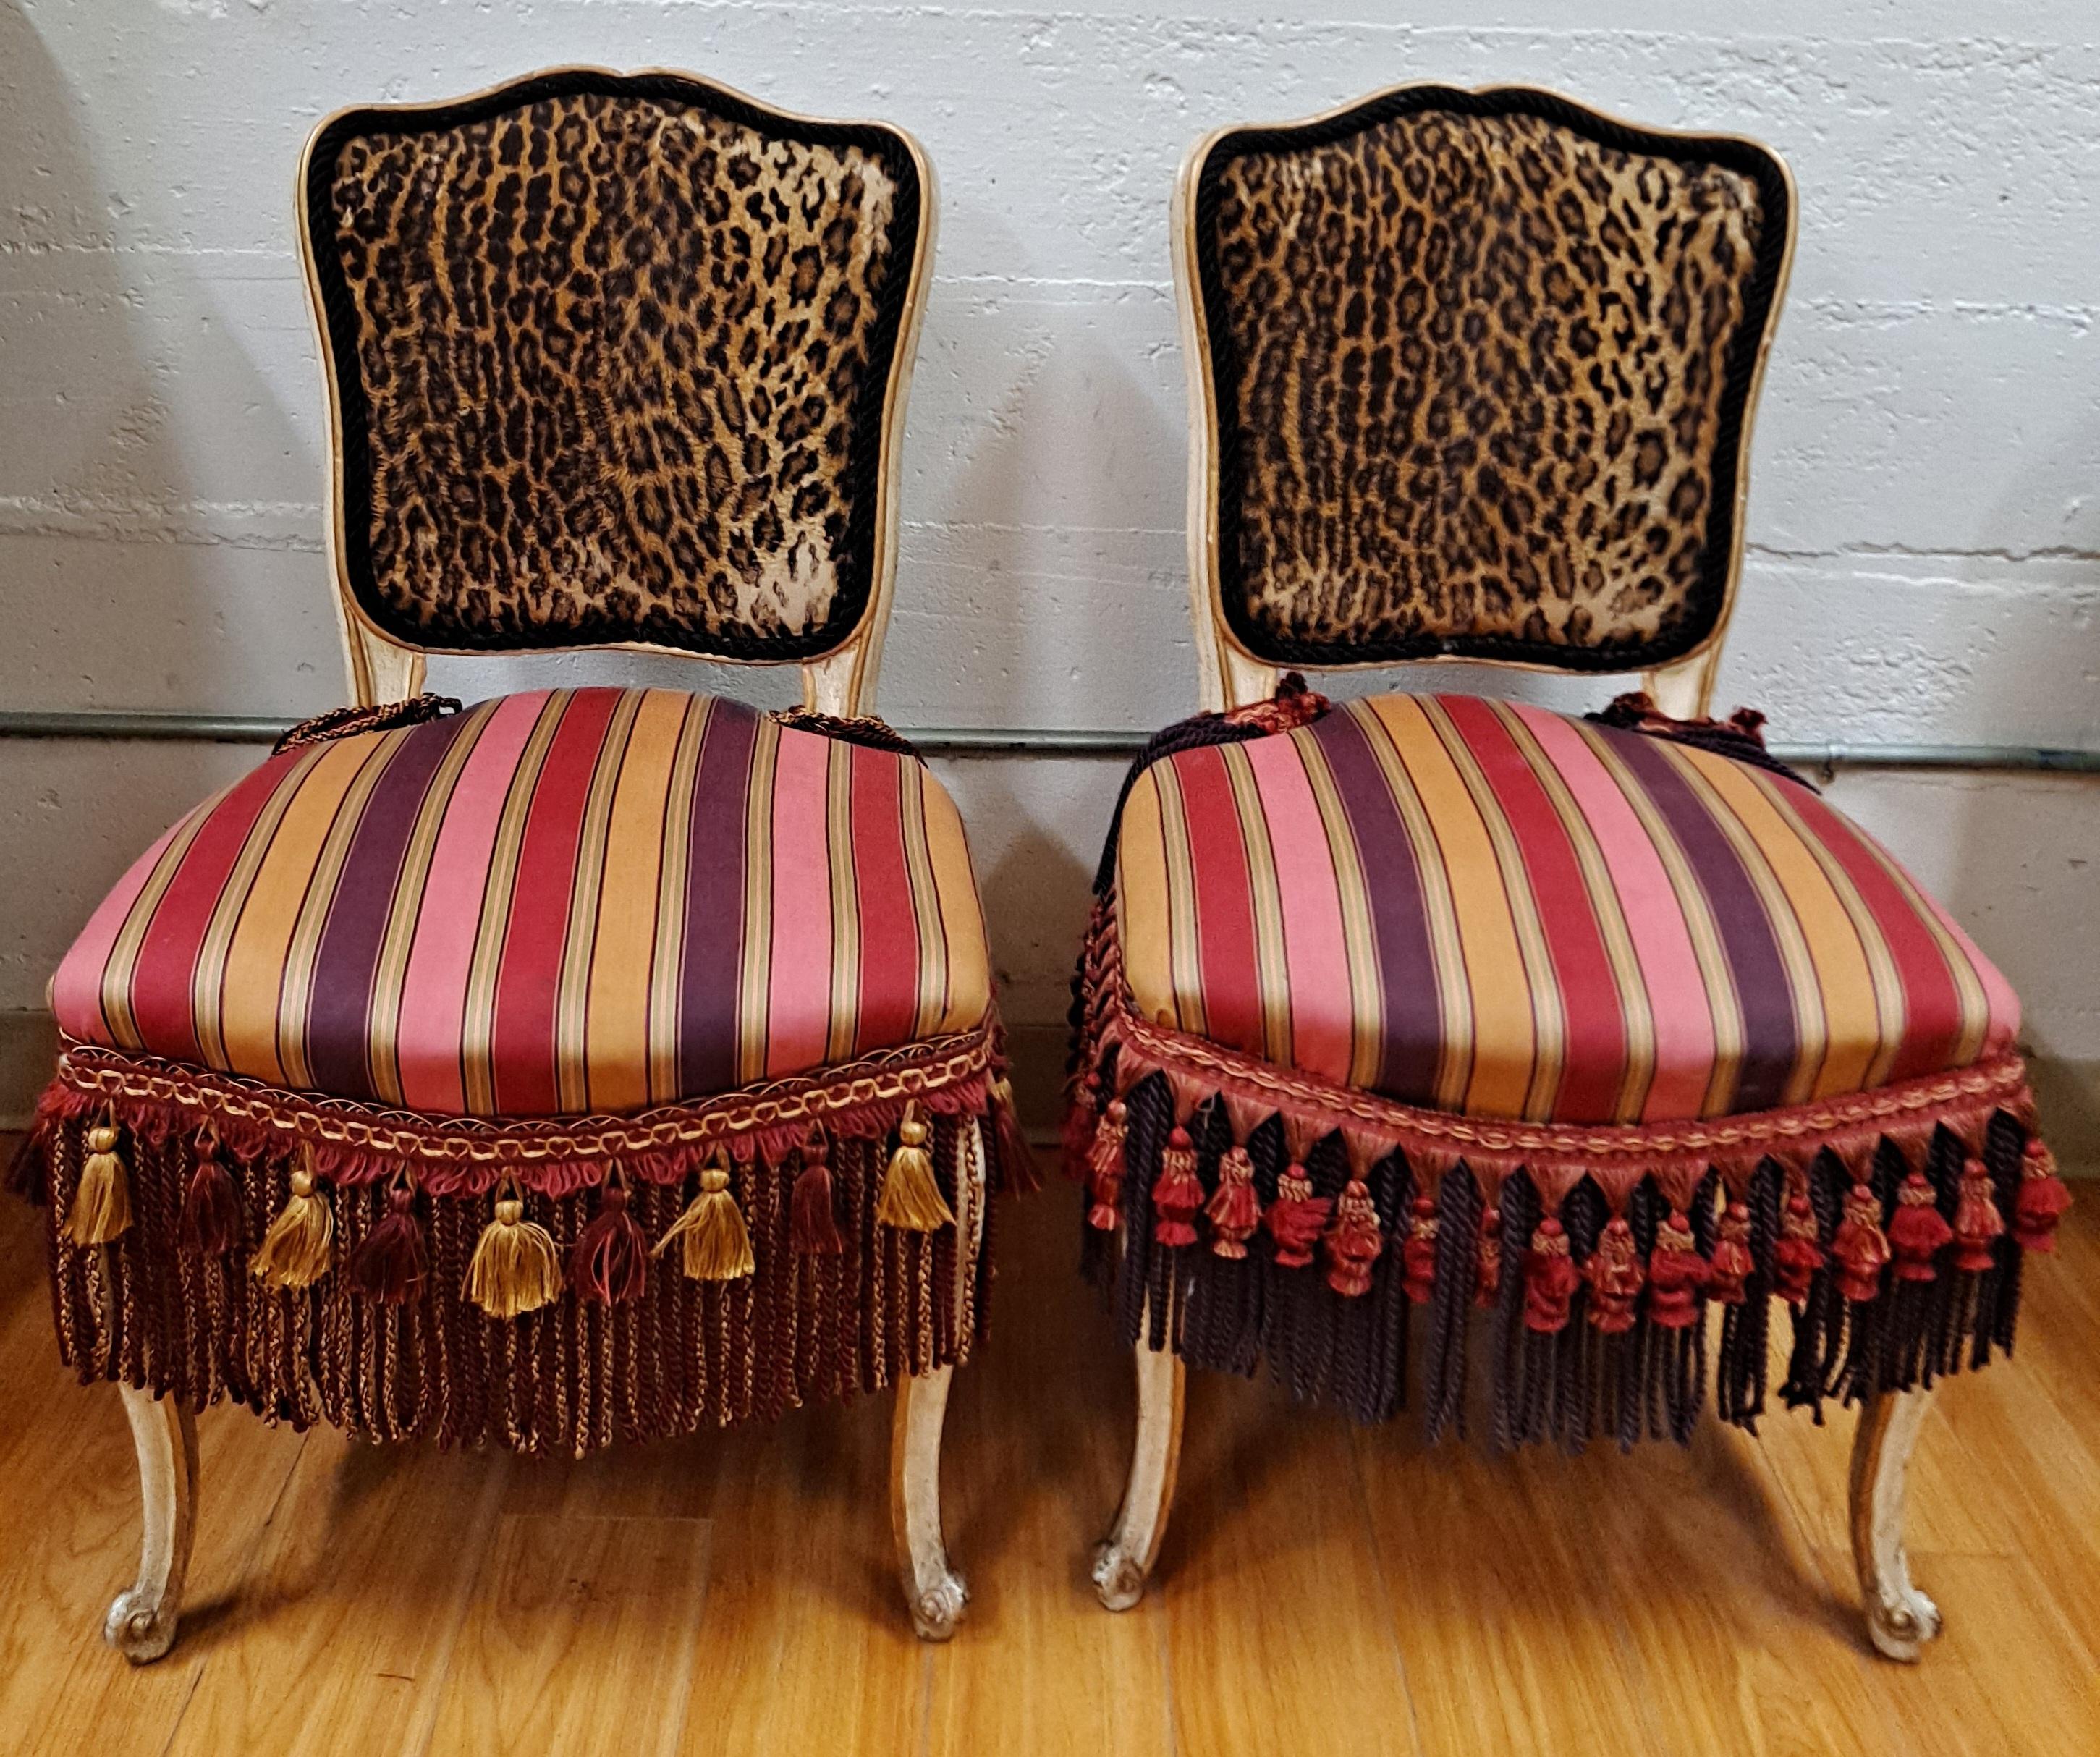 Pair of French Style Side Chairs

Custom leopard print upholstered backs and silk stripe upholstered seats with tassels

21